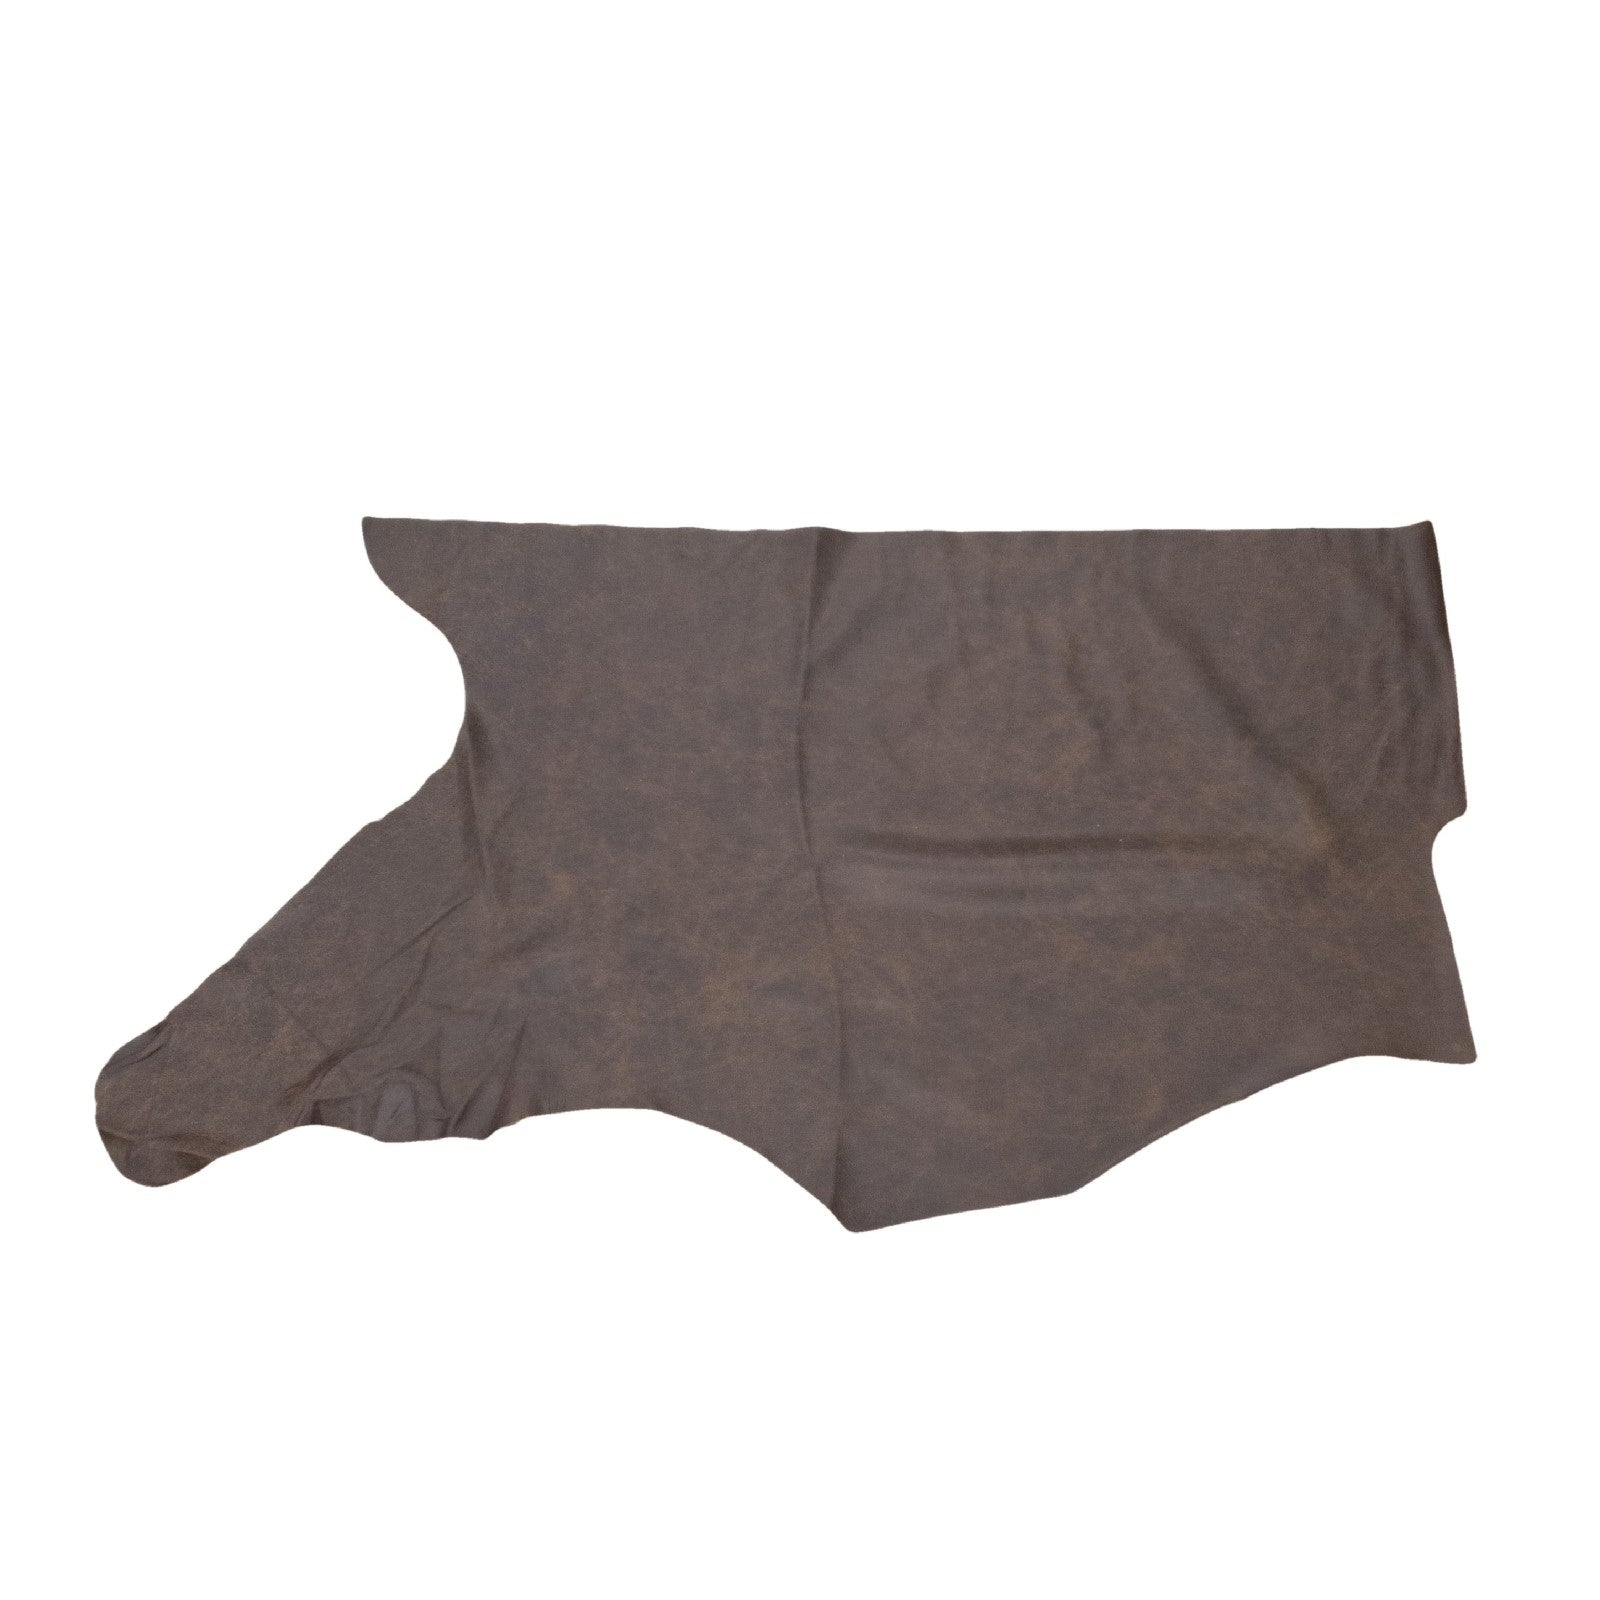 B-52 Brown, 2-3 oz Cow Hides, Vintage Bomber Browns, Bottom Piece / 5.5-6.5 | The Leather Guy